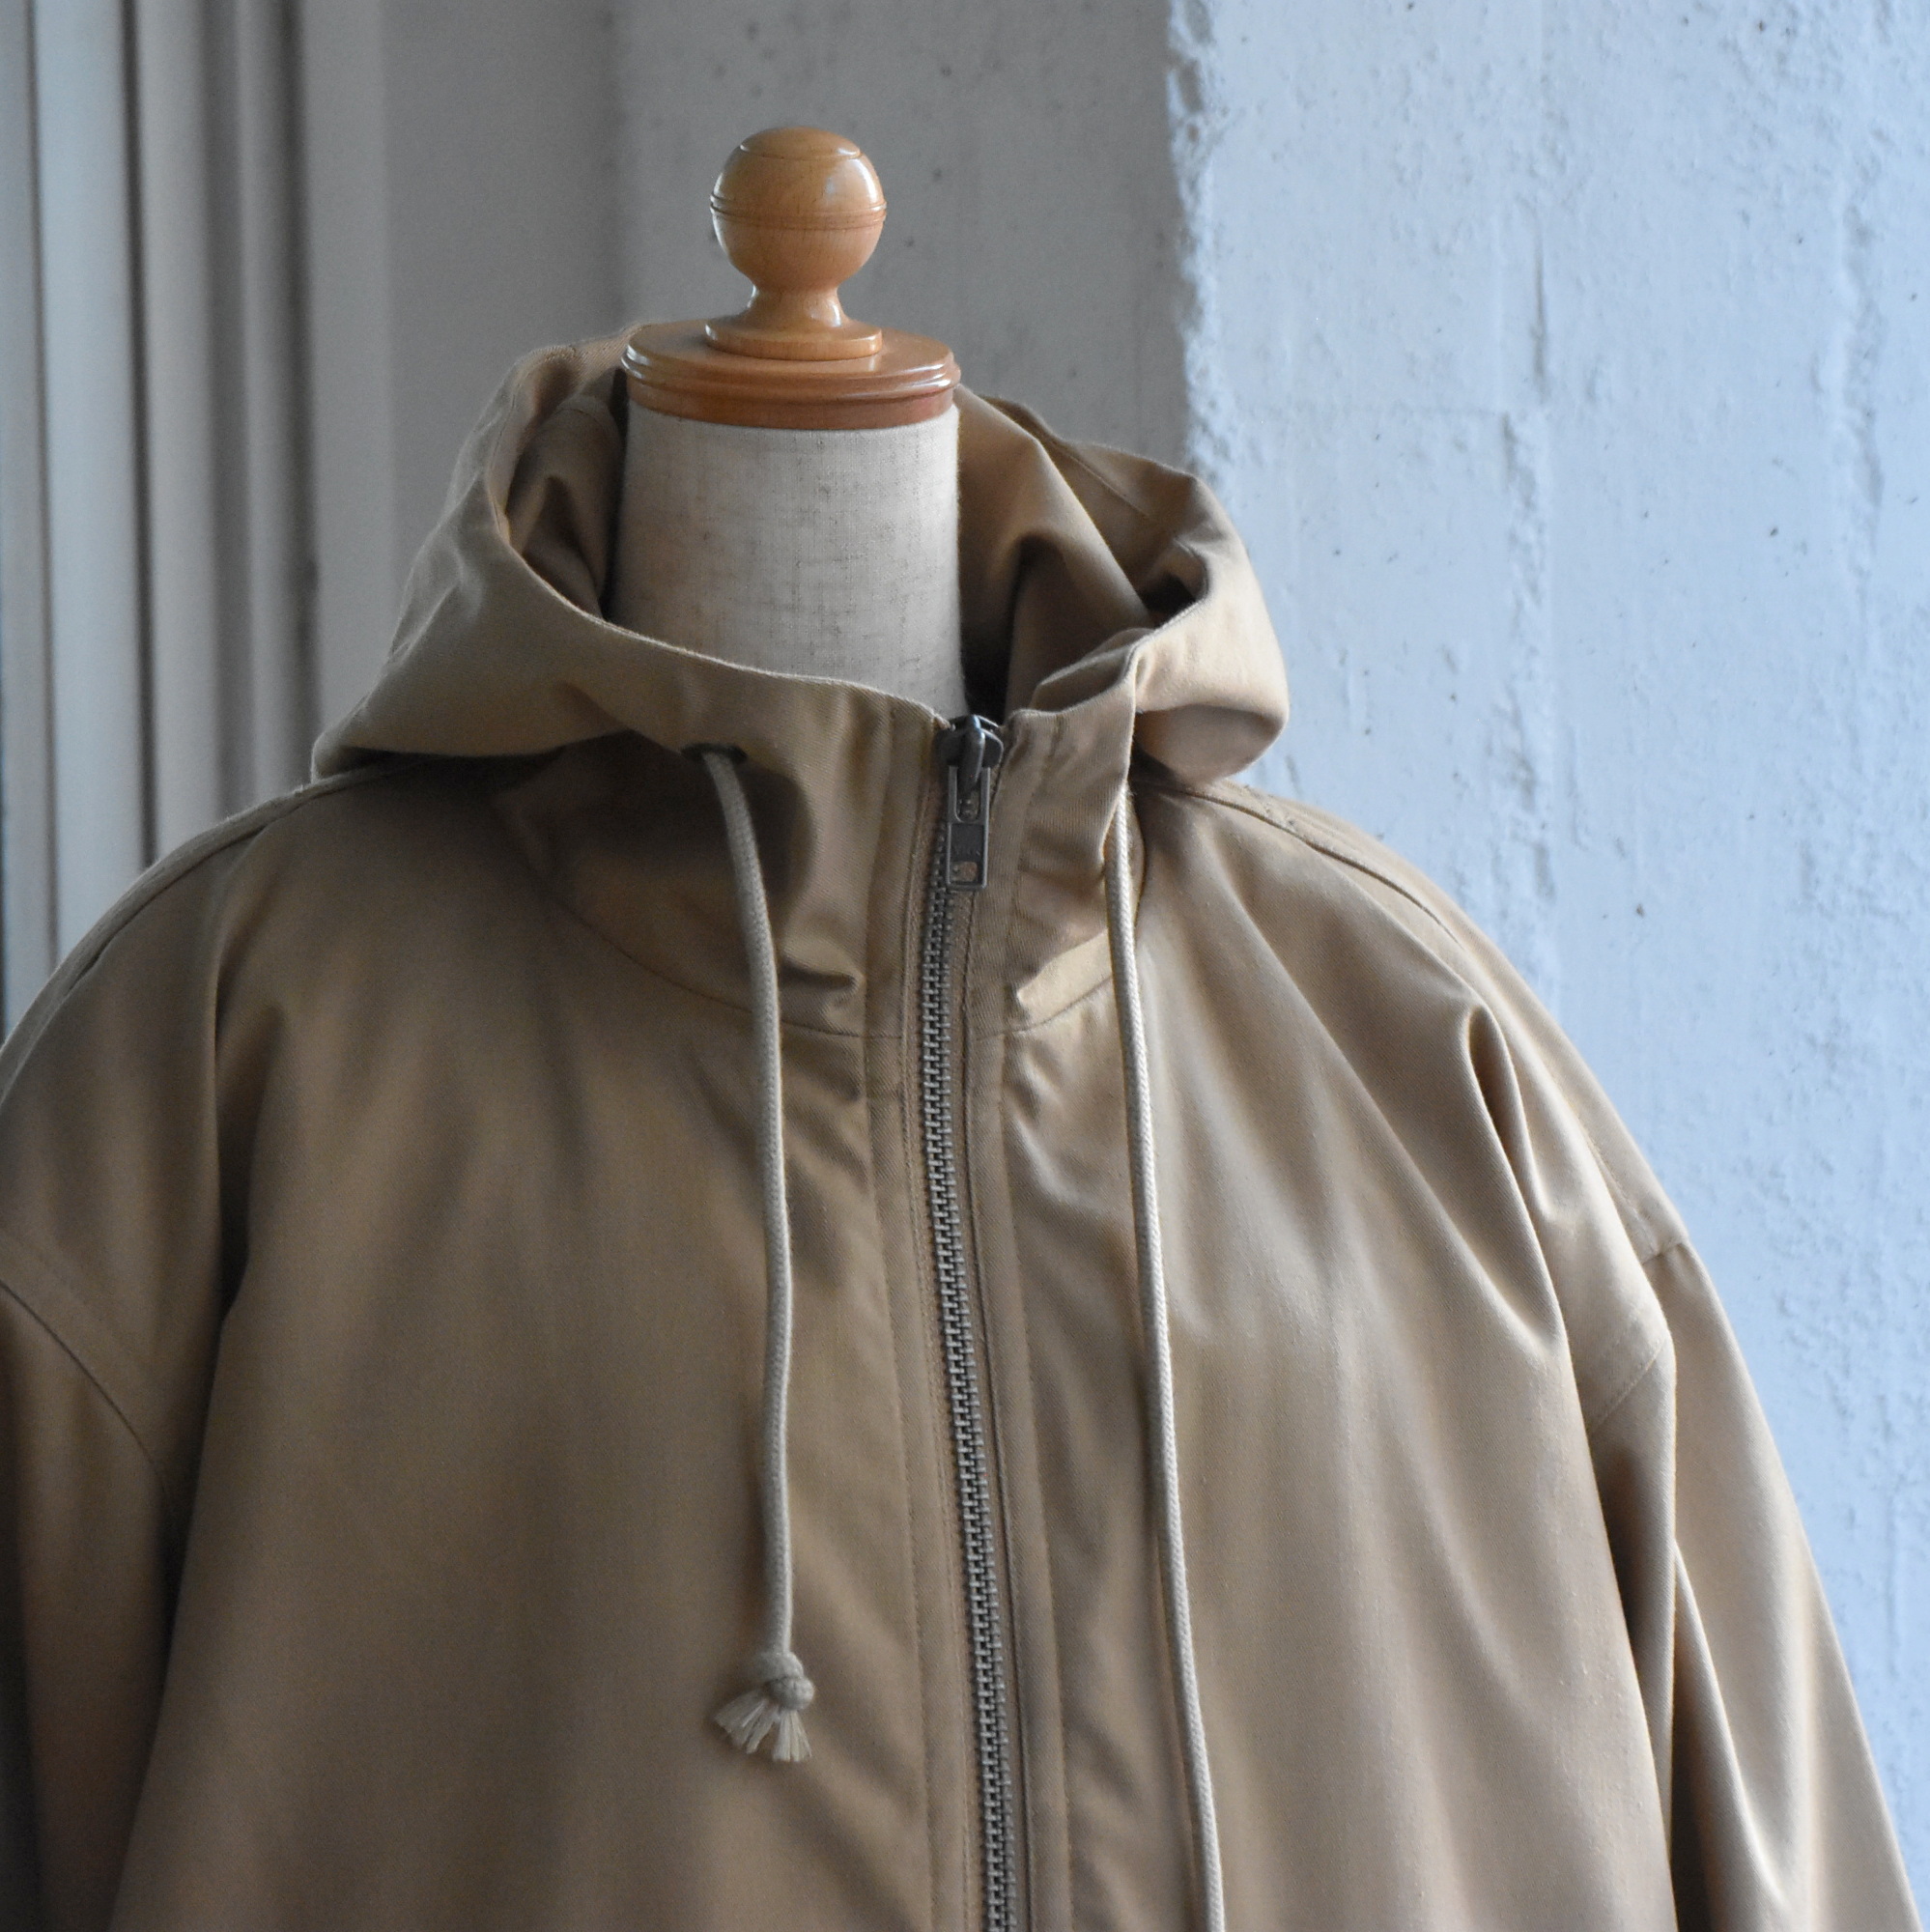 40% off sale】SOFIE D'HOORE(ソフィードール) / Hooded parka with 